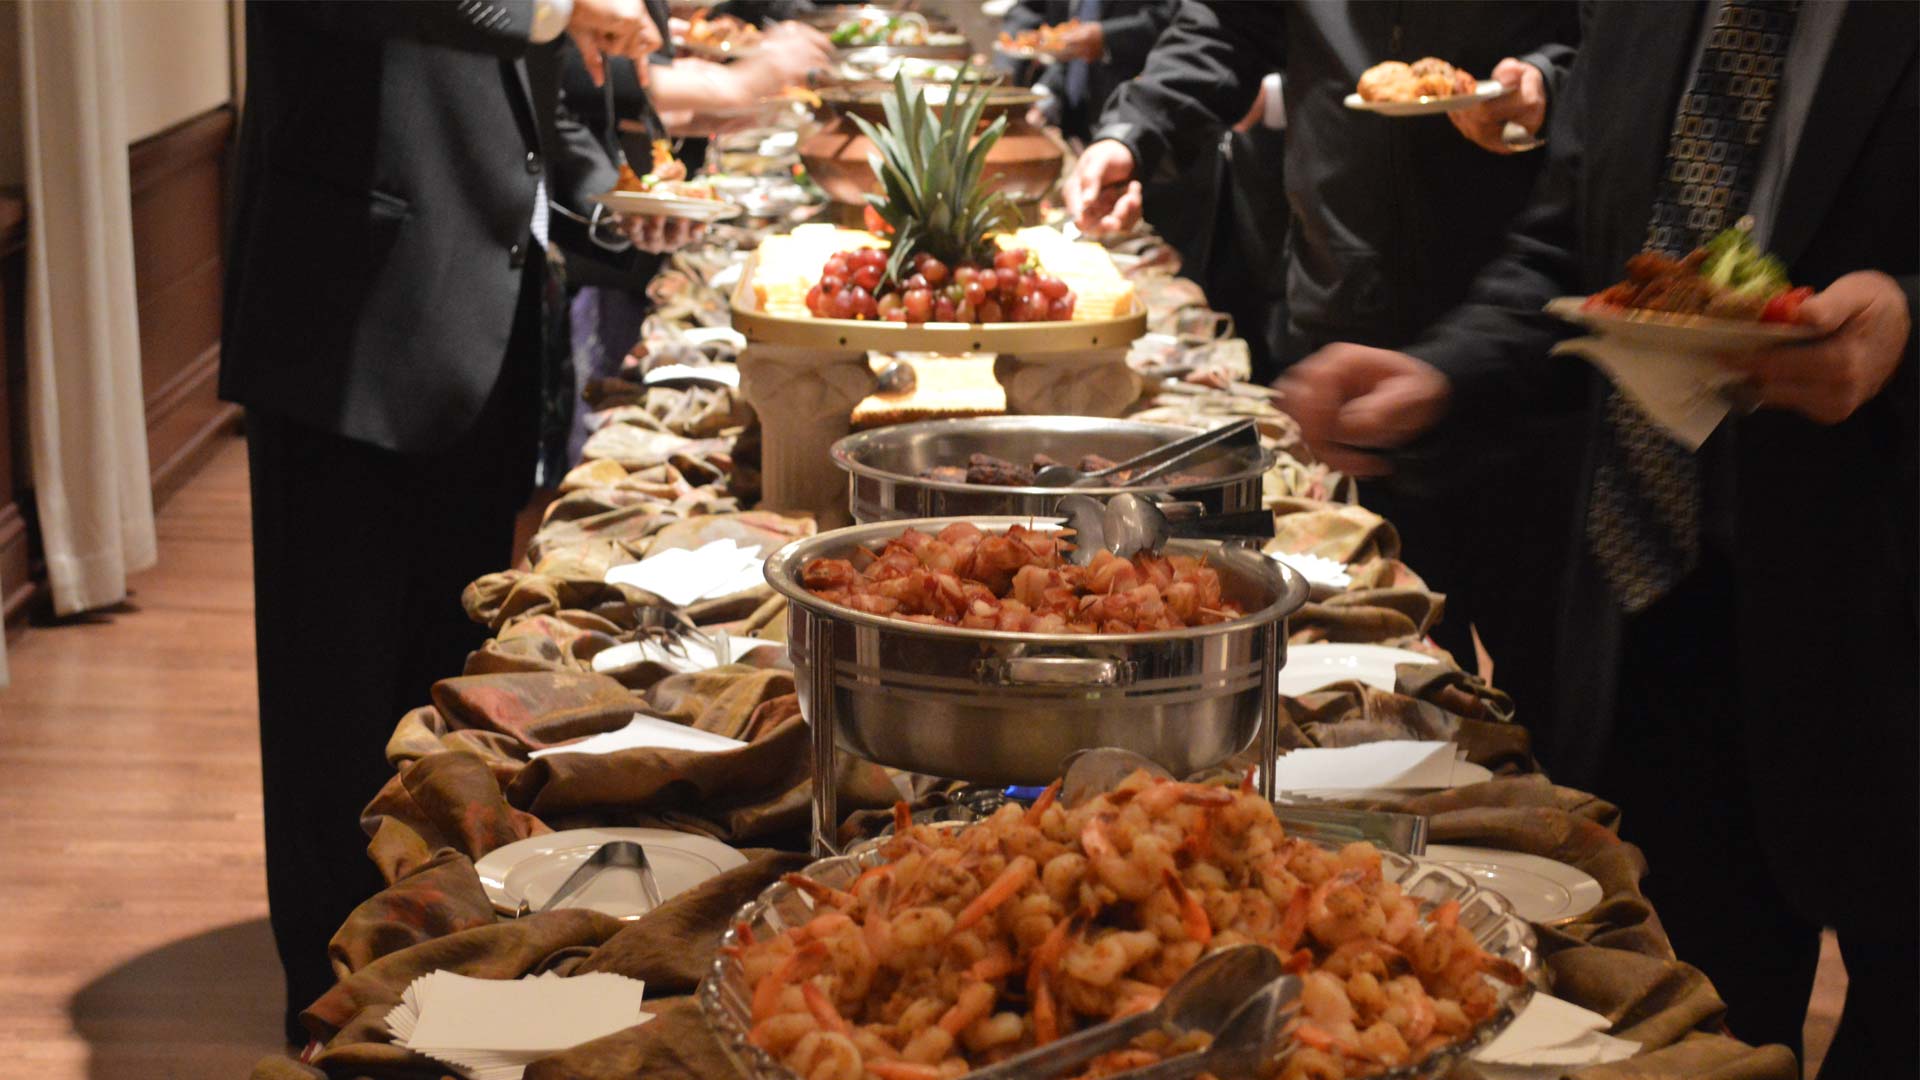 Buffet table with shrimp, fruits and other foods